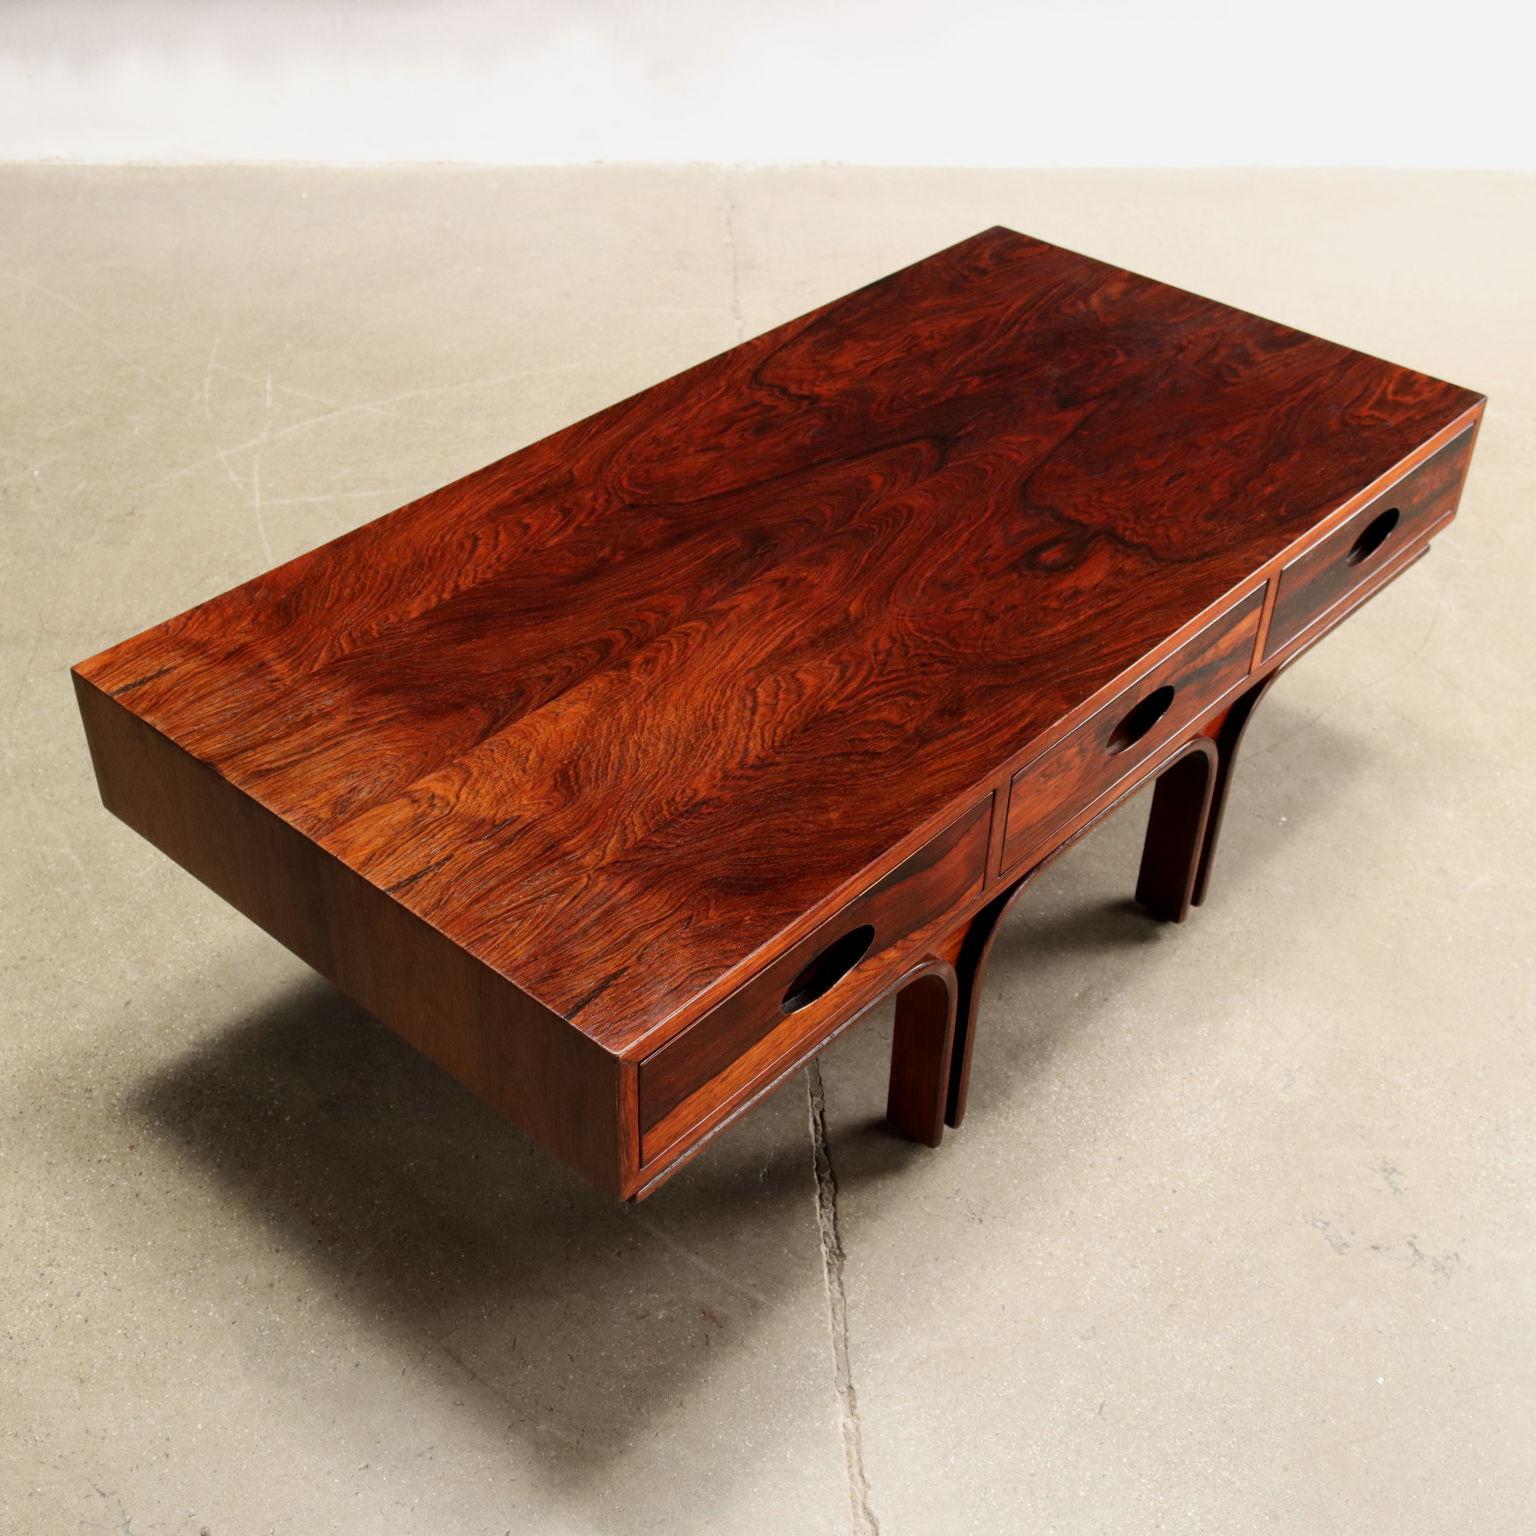 Gianfranco Frattini Coffee Table with Three Drawers for Bernini, 1960s in wood In Excellent Condition For Sale In Milano, IT